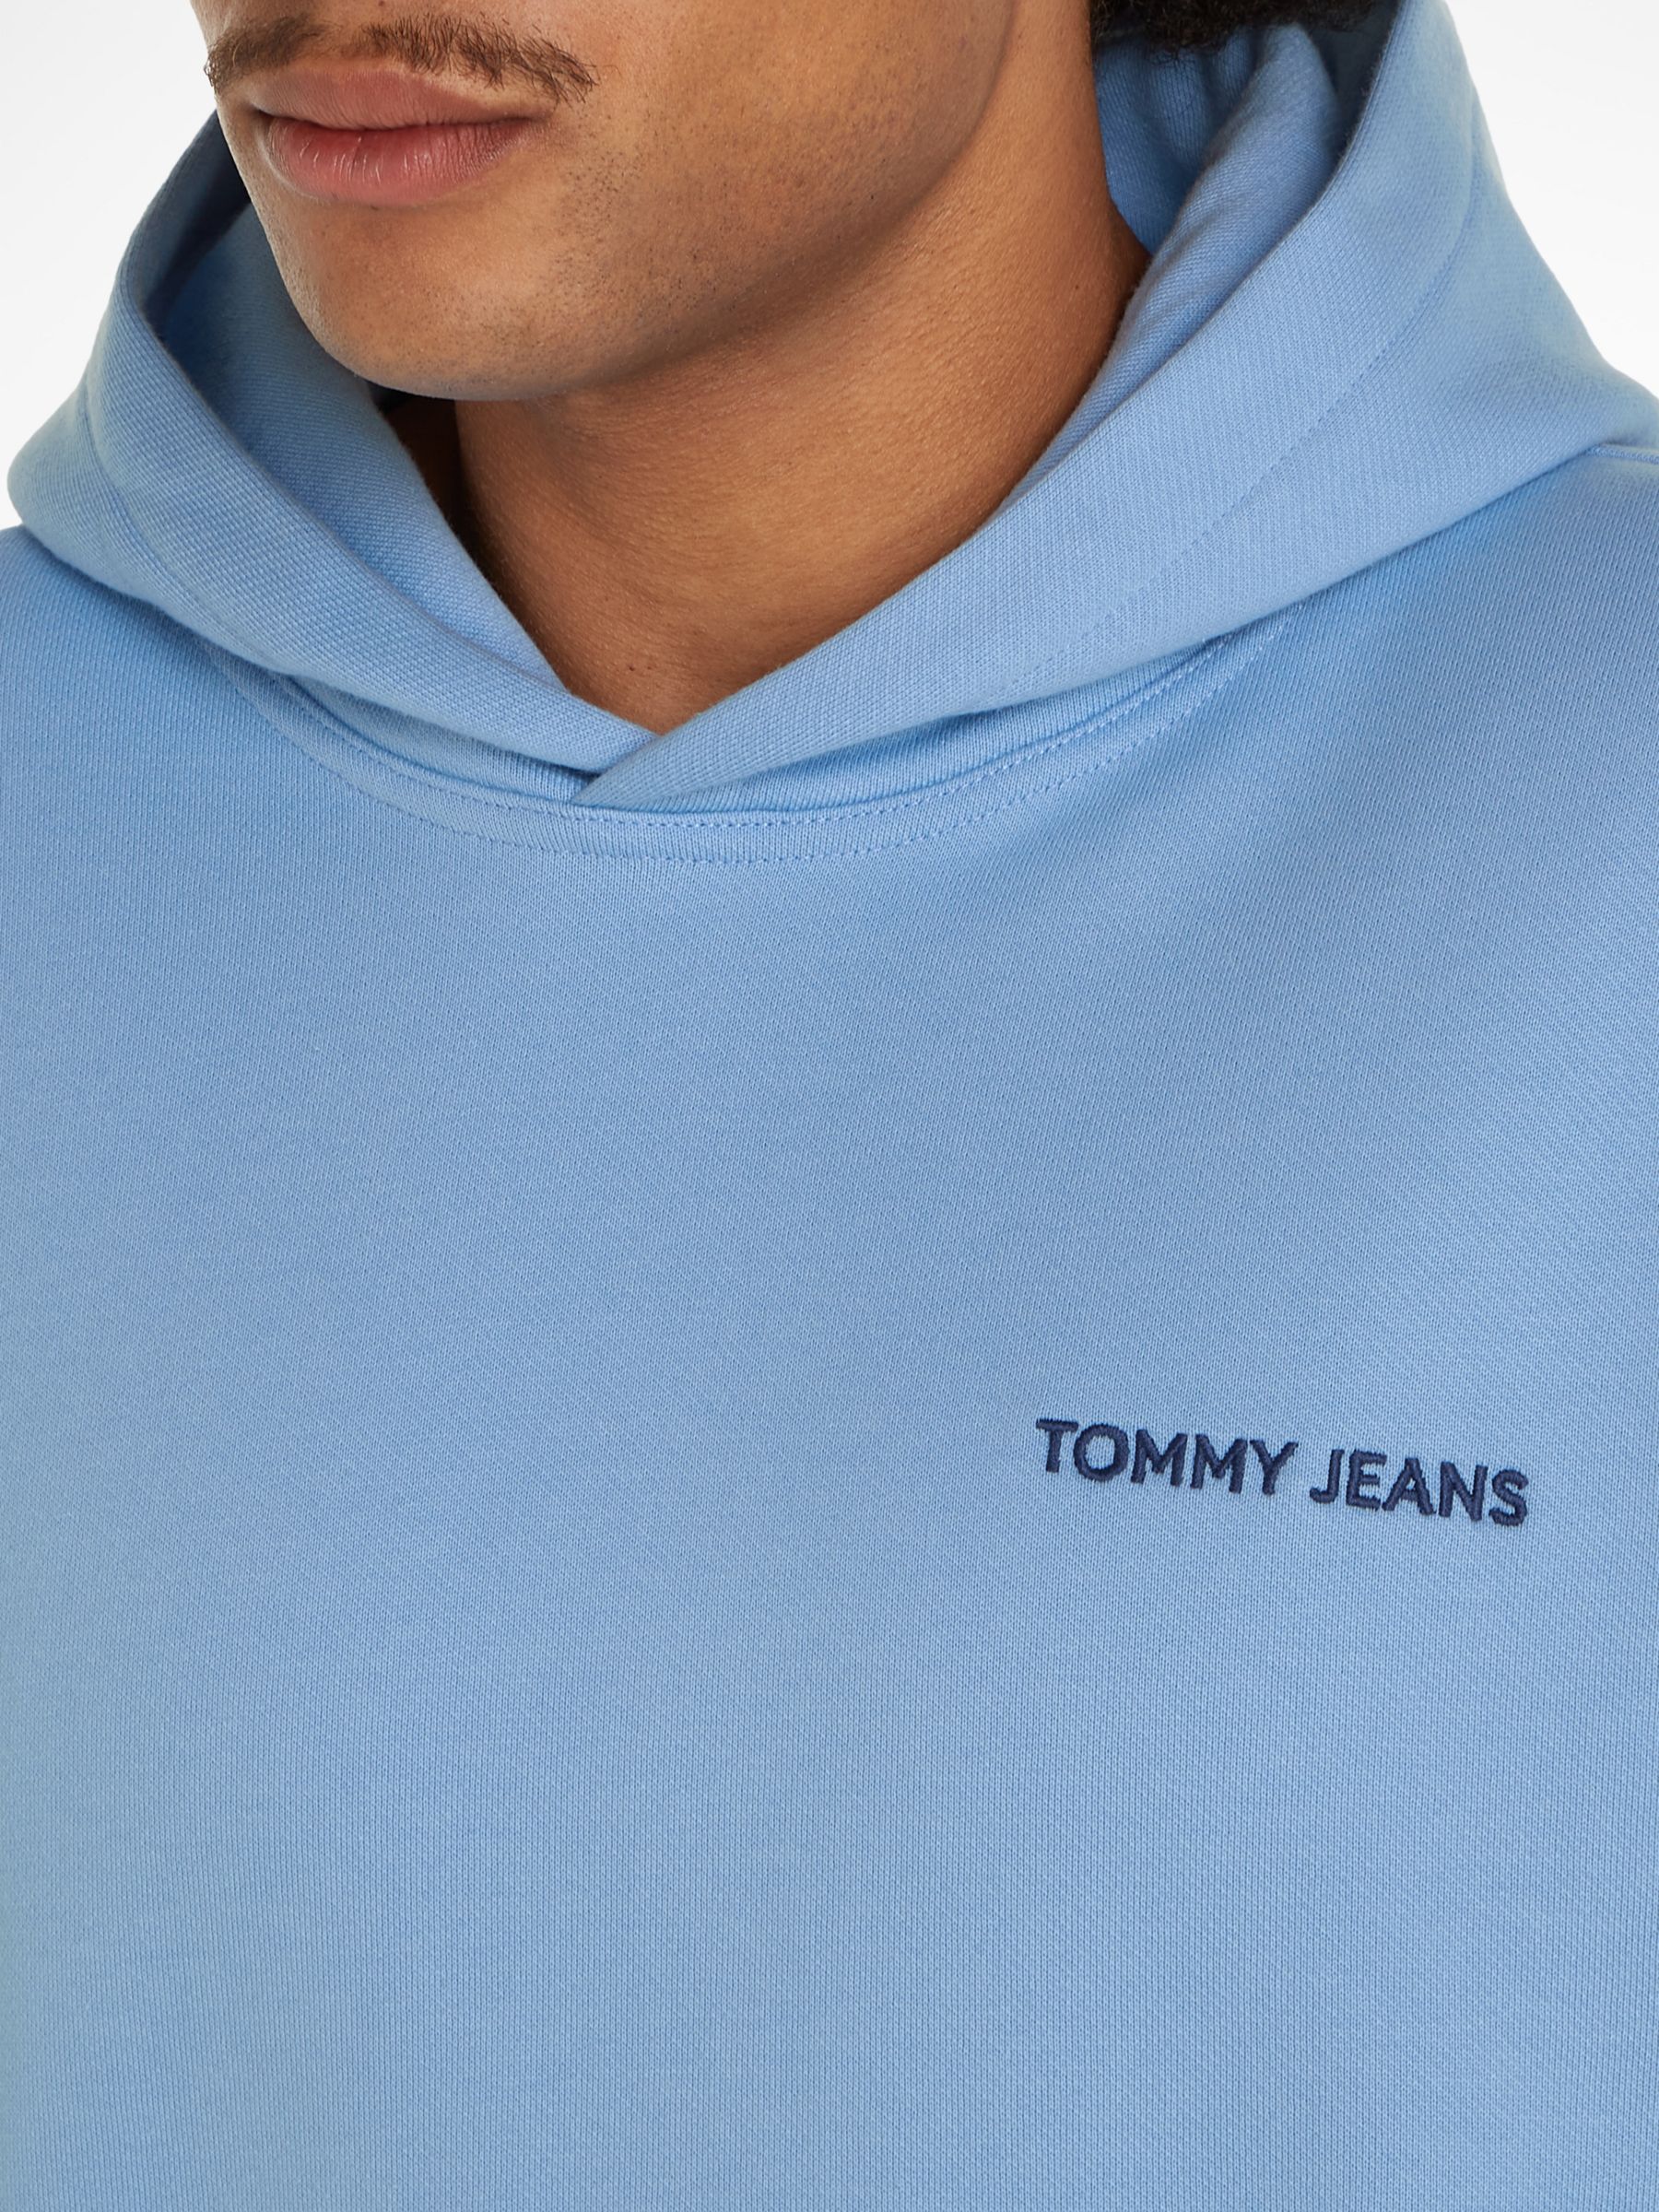 Tommy Jeans Relaxed Cotton Hoodie, Moderate Blue, L